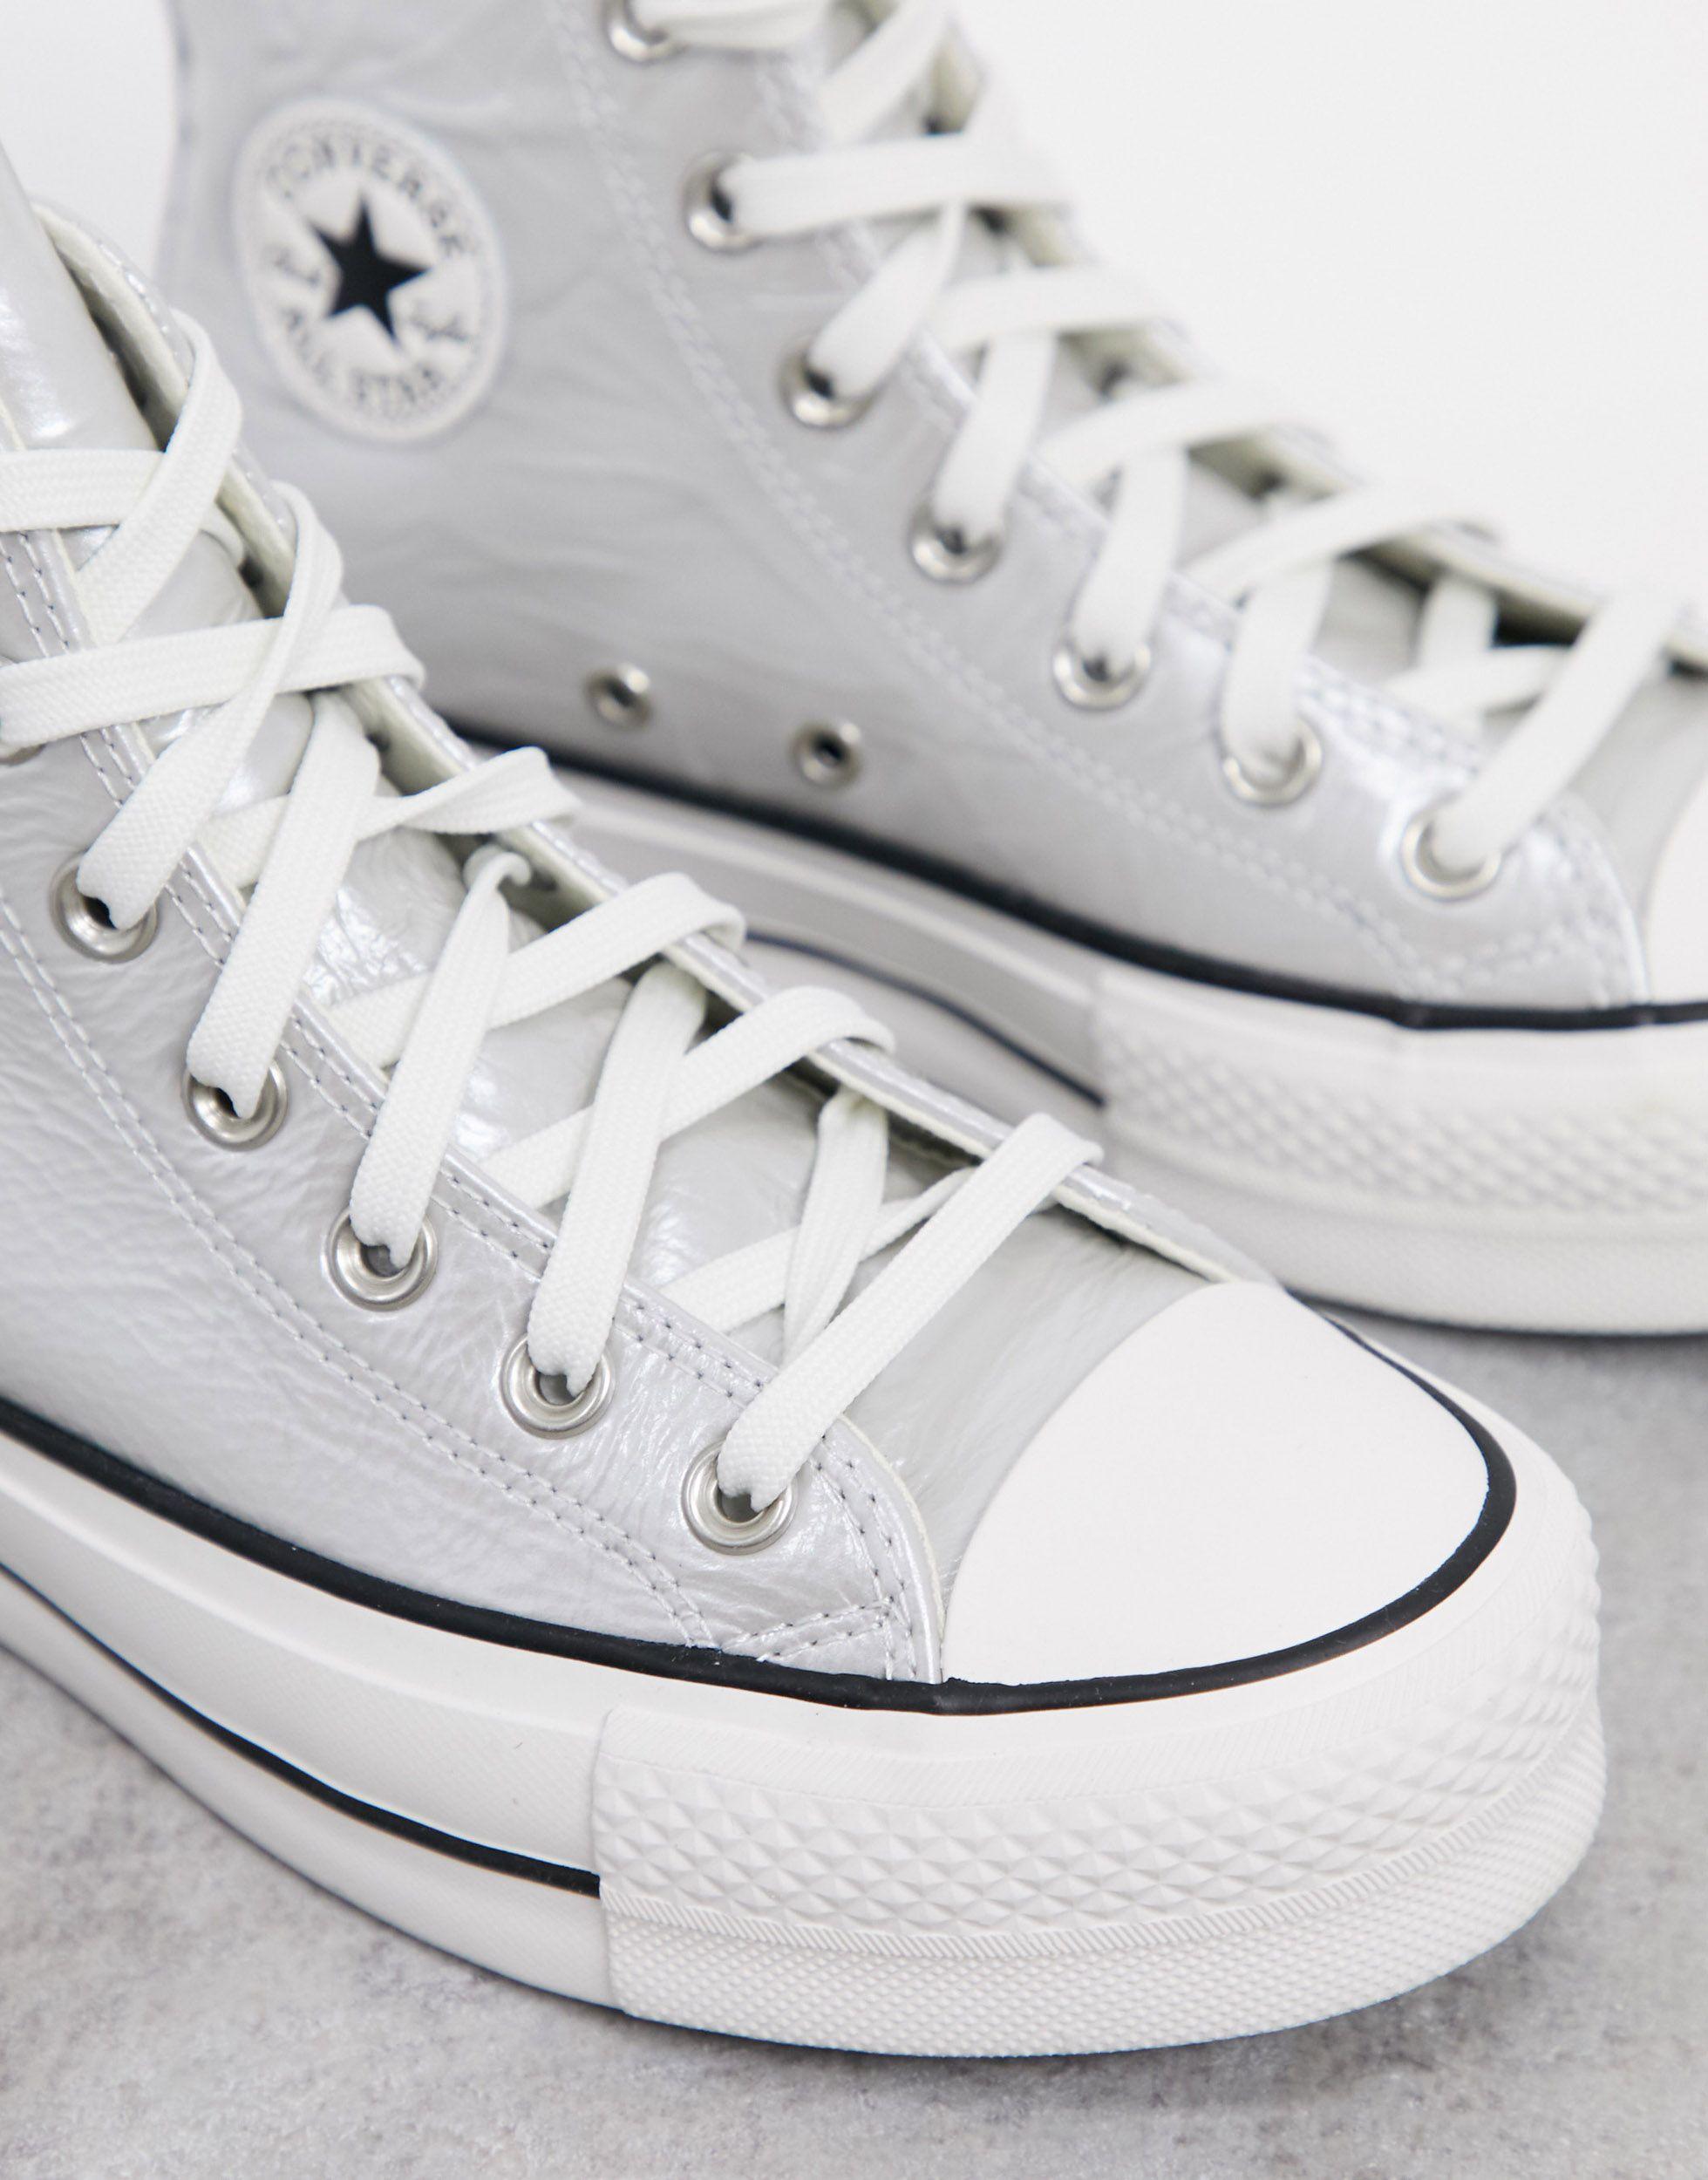 Converse Rubber Chuck Taylor All Star Hi Lift Sneakers in Silver (Metallic)  | Lyst